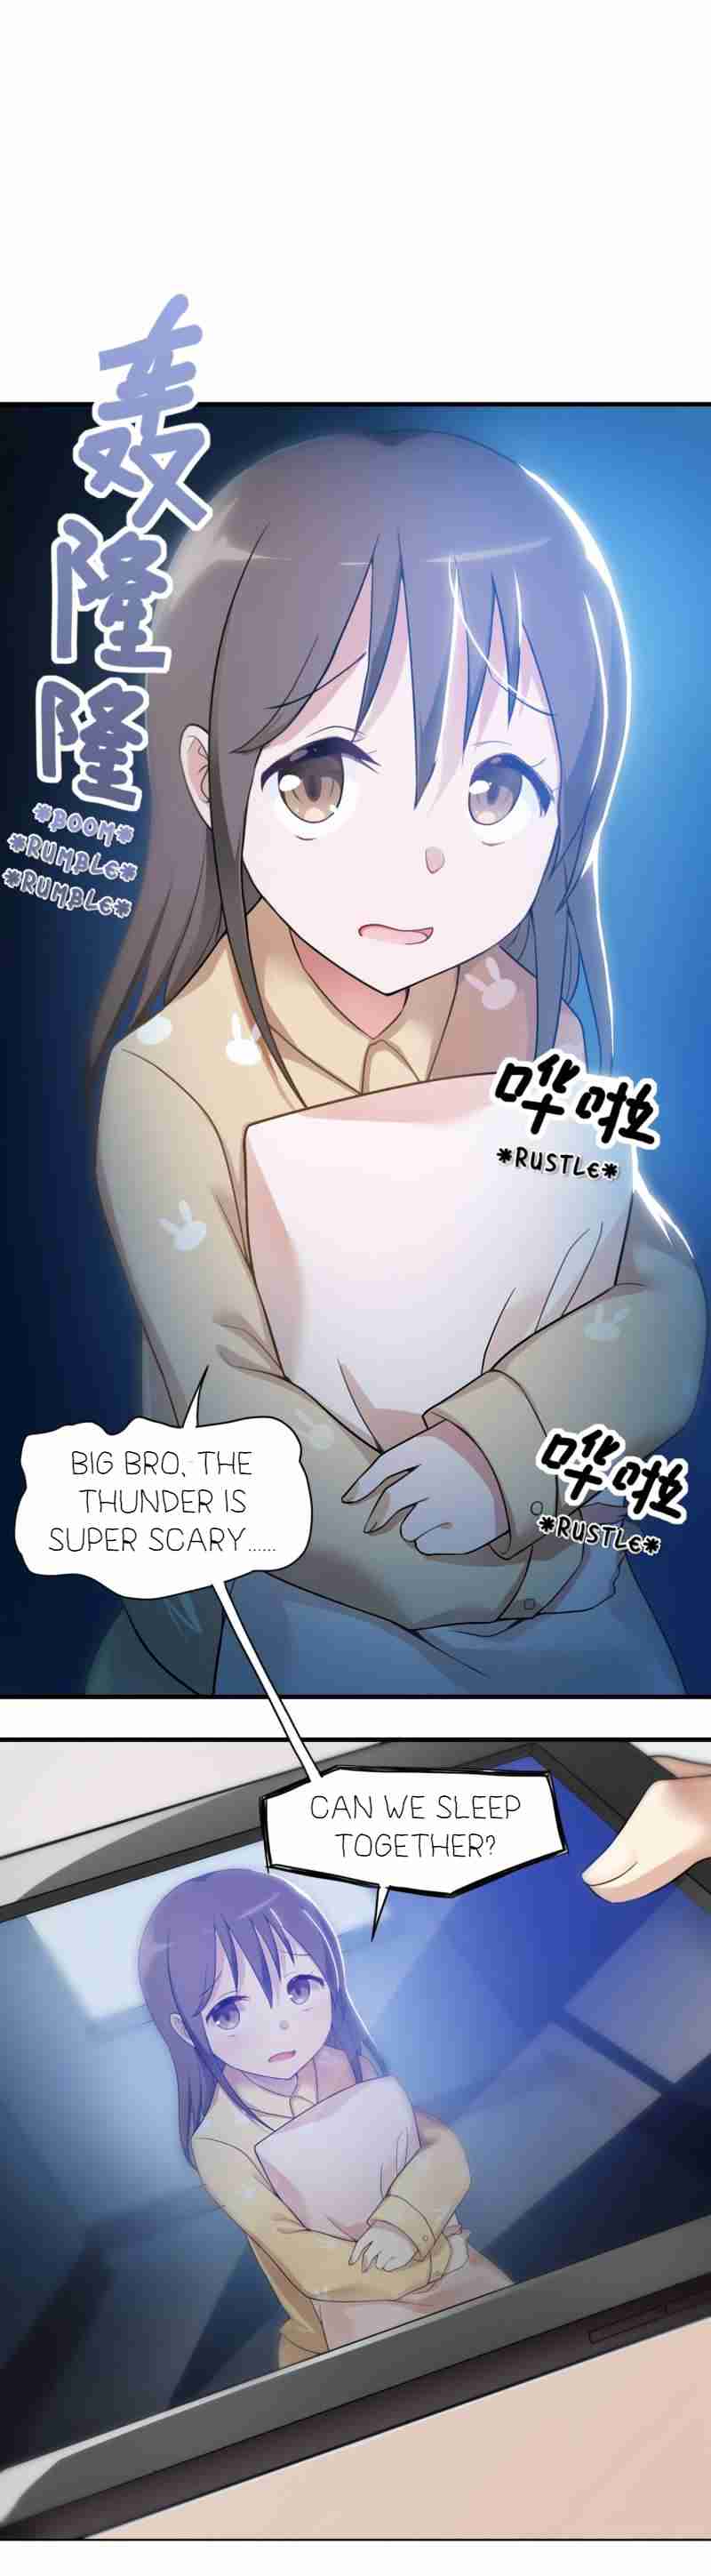 Sister, Don't Mess With Me! Ch. 1 Sisters Suddenly Appearing